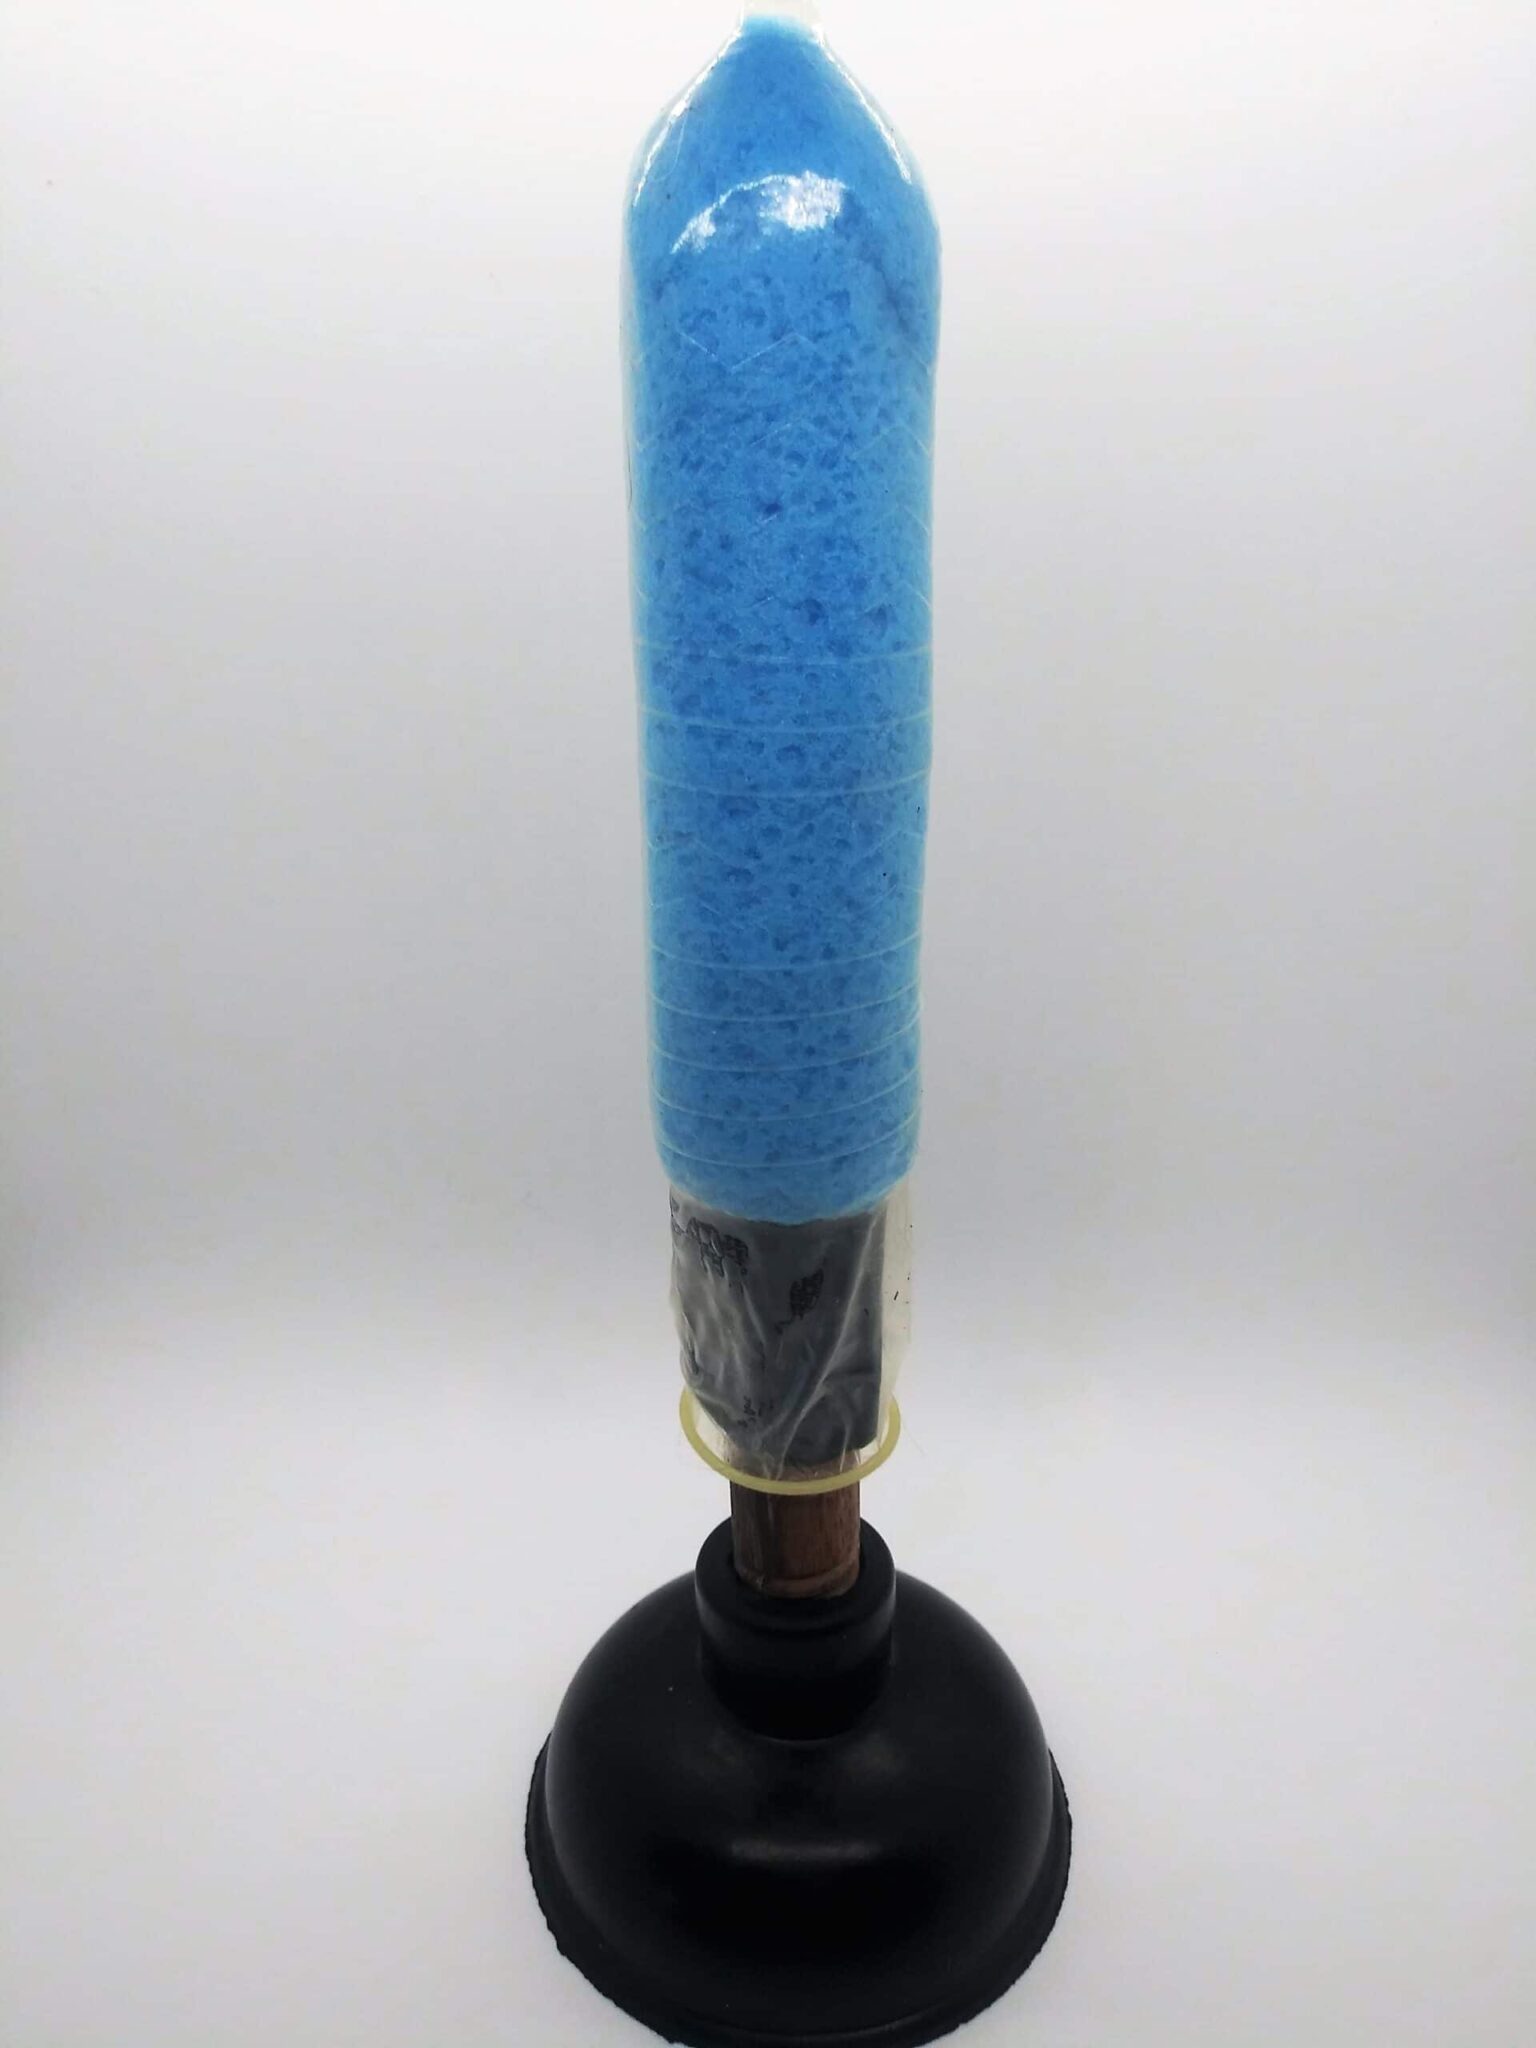 DIY anal sex toys using a plunger. Photo of a small, sink plunger with the handle covered by a sponge and condom.